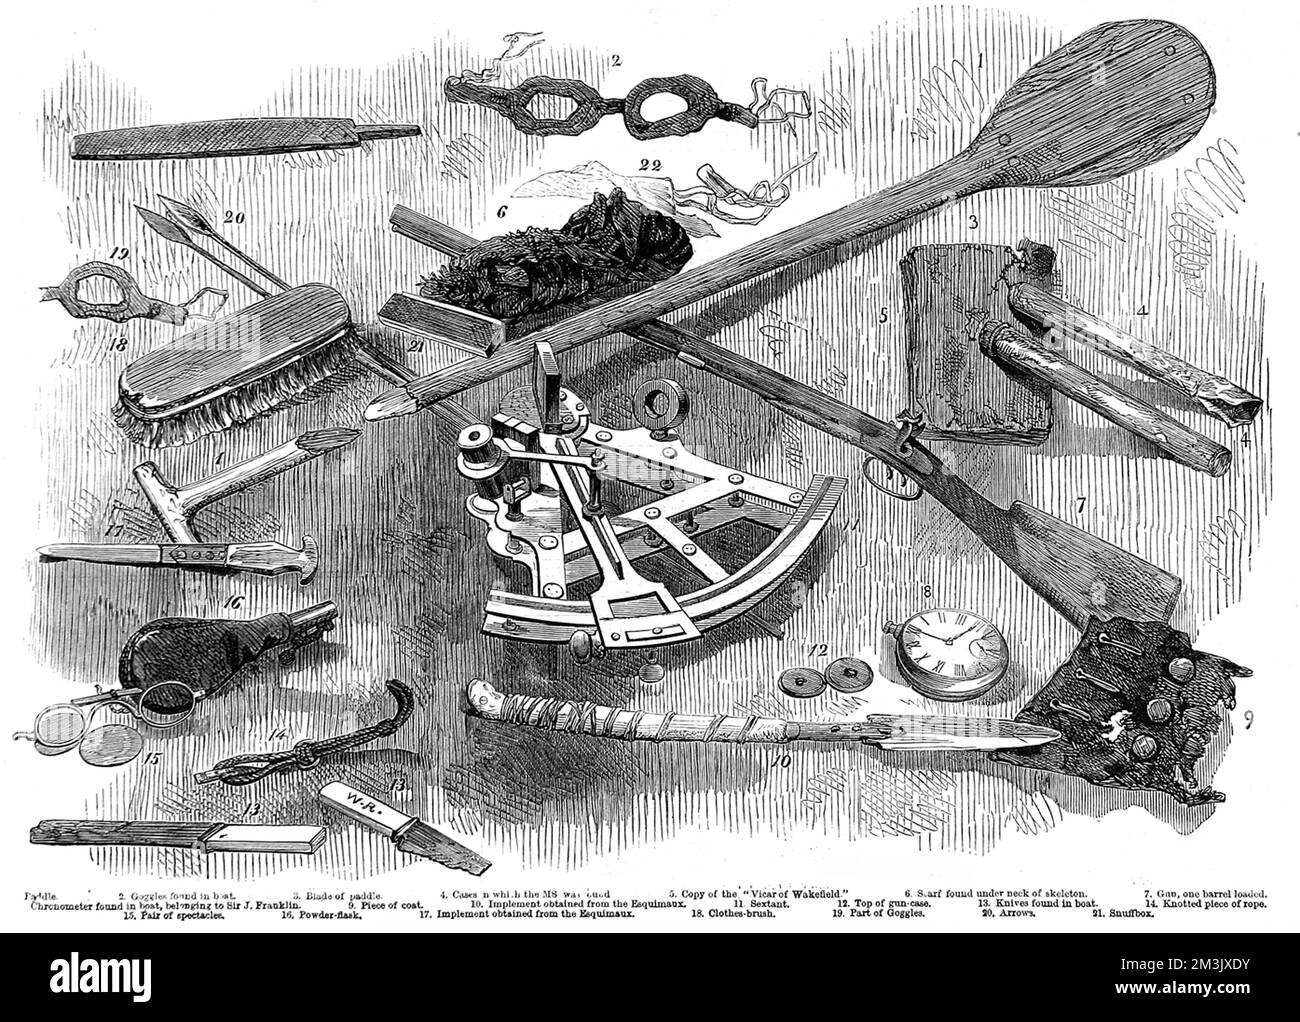 Relics of Sir John Franklin's ill-fated Arctic expedition of 1845, which were found by Francis Leopold McClintock in 1859. The items include Sir John Franklin's chronometer, a sextant, a loaded gun, a knife initialled with 'W.R.' and a copy of the 'Vicar of Wakefield'.  In 1845 the British Admiralty sent two polar exploration ships, HMS 'Erebus' and HMS 'Terror', to look for the Northwest passage round the northern coast of Canada. The expedition, commanded by Sir John Franklin, disappeared from view late in 1845 and none of the men were ever seen again.   In fact the ships made it t Stock Photo